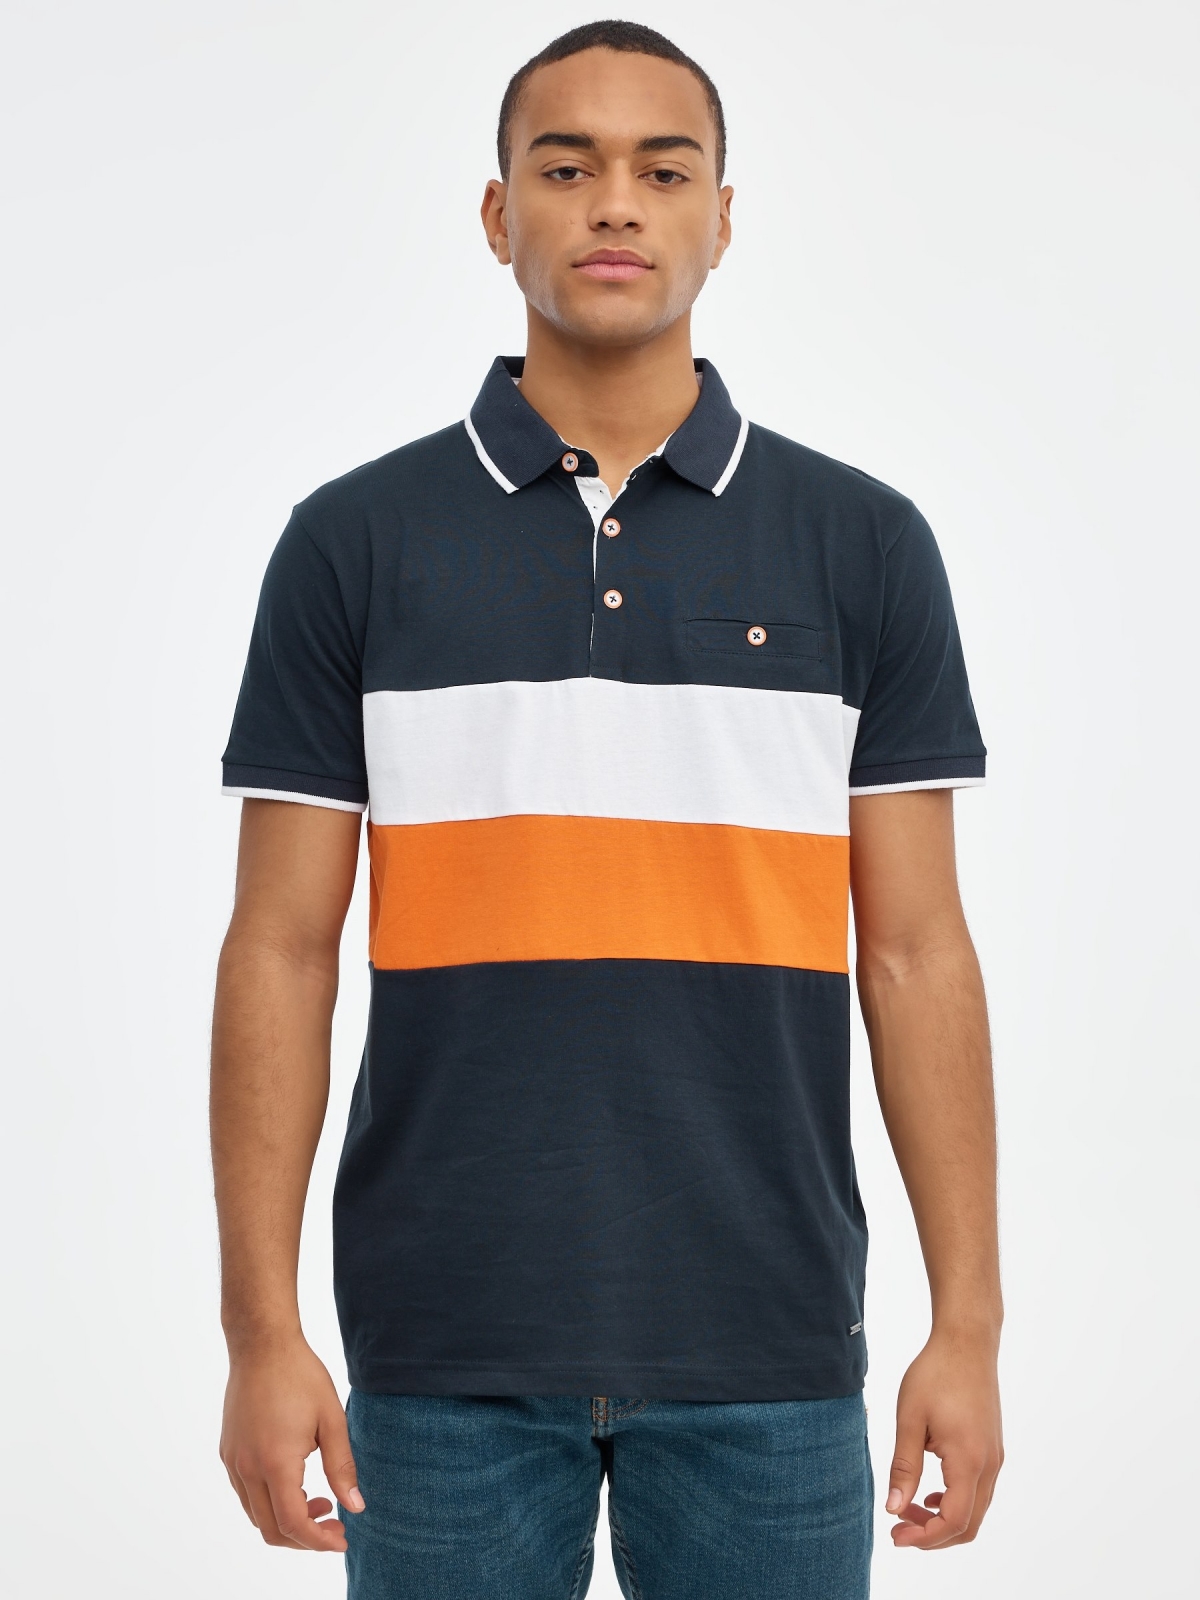 Orange and white color block polo shirt navy middle front view